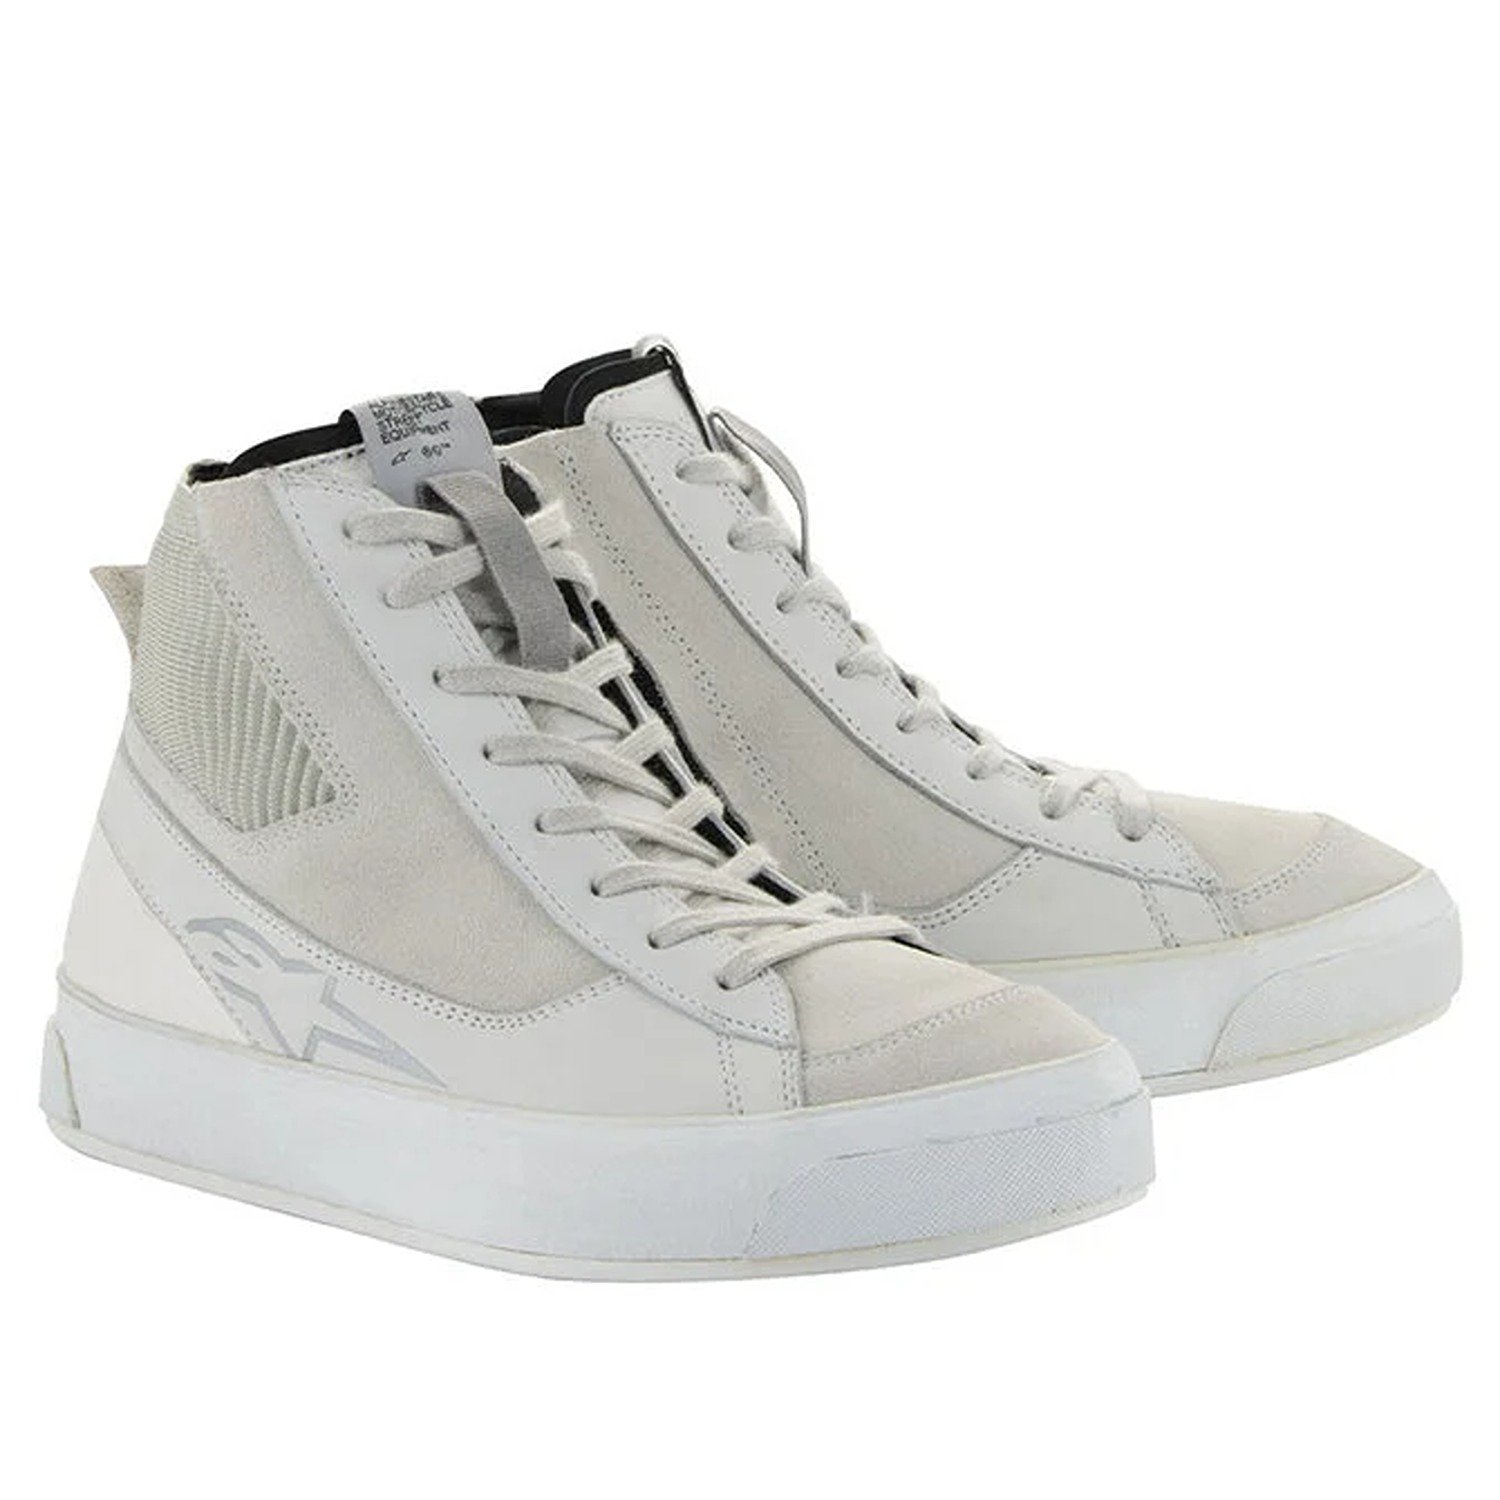 Image of Alpinestars Stated Shoes White Cool Gray Taille US 115